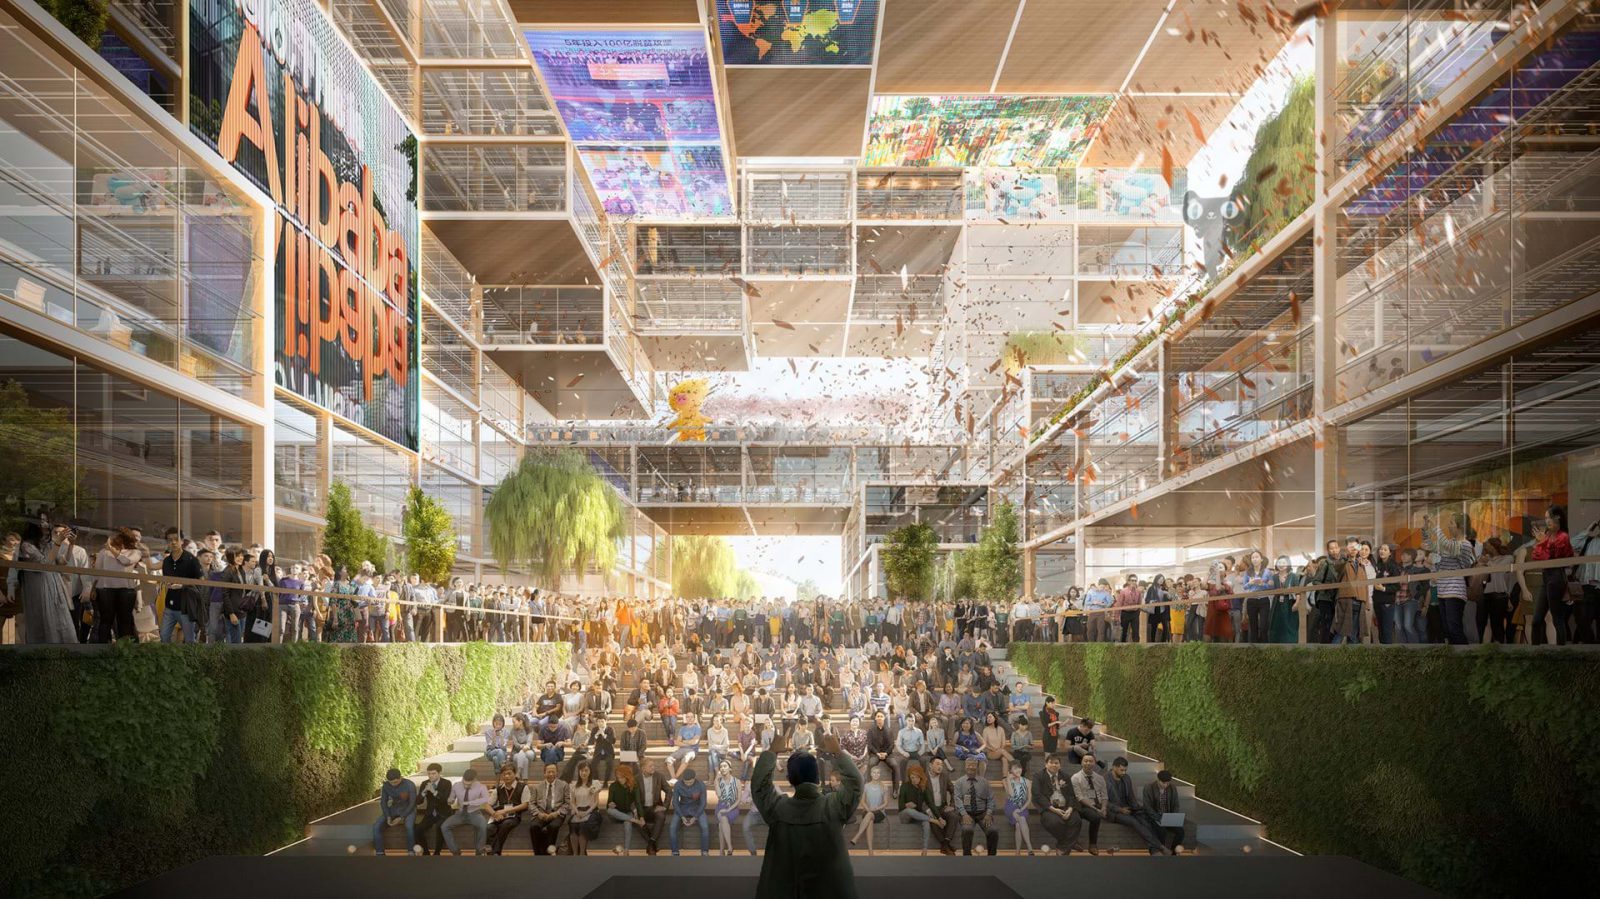 Archisearch Foster + Partners wins competition to design Alibaba’s new HQ in Shanghai